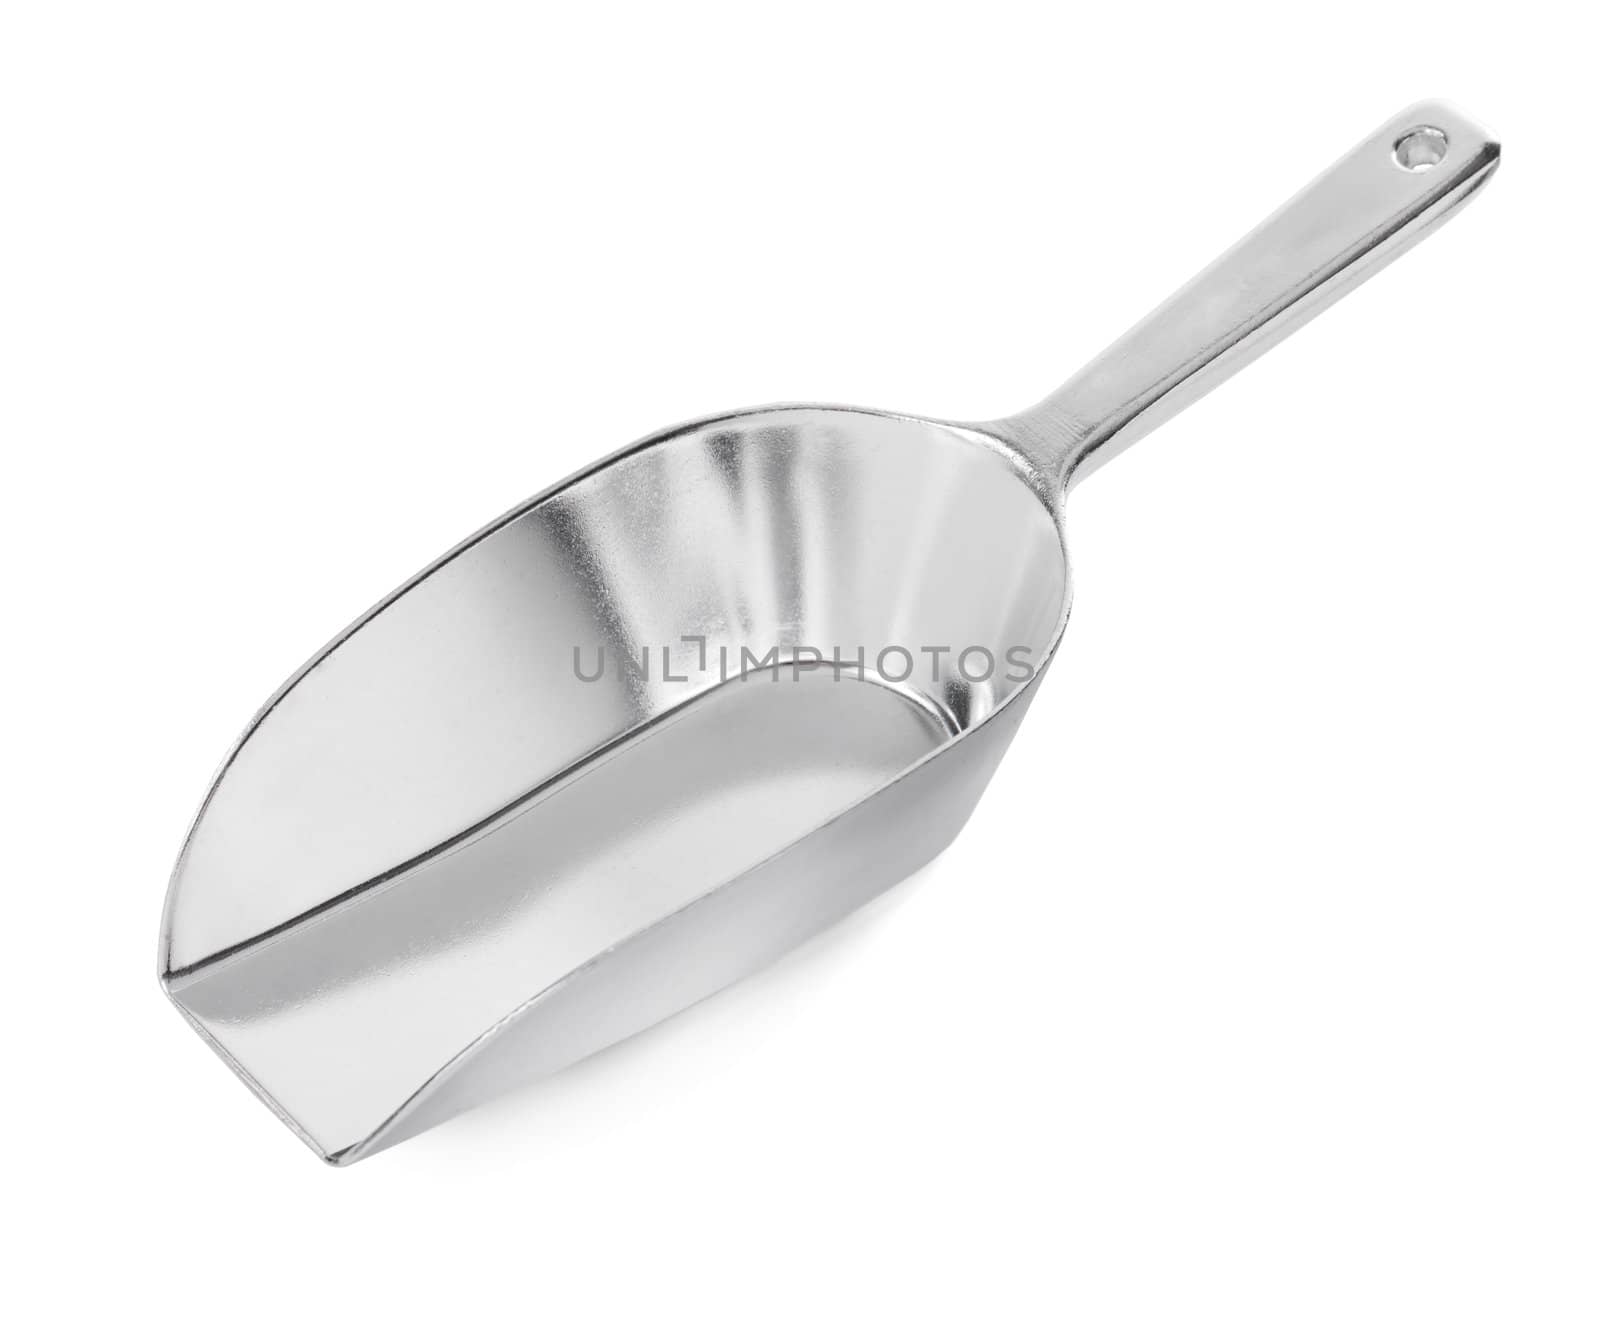 Aluminum transfer scoop used in cooking, isolated on white with natural shadow.